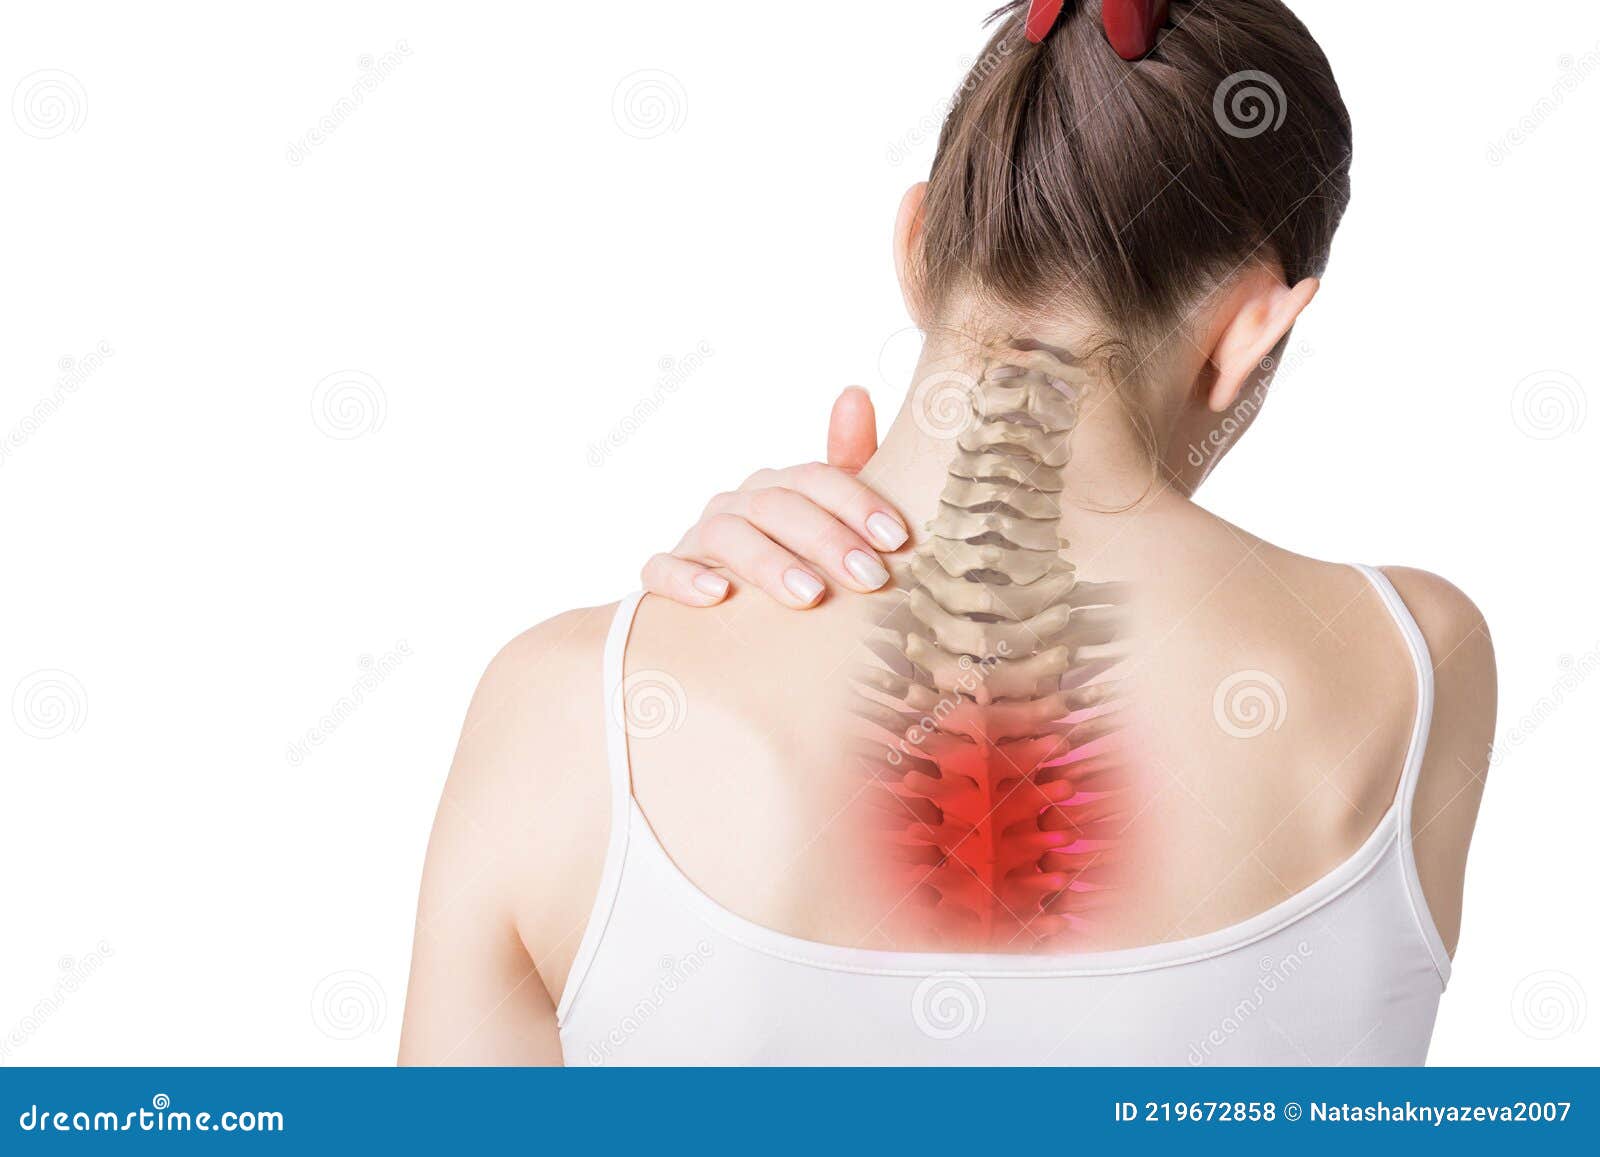 Female Neck, Back and Trapezius Muscles with Upper Spine Inside, Thoracic  Region Marked Red. Caucasian Woman Touches Her Stock Photo - Image of back,  backache: 219672858